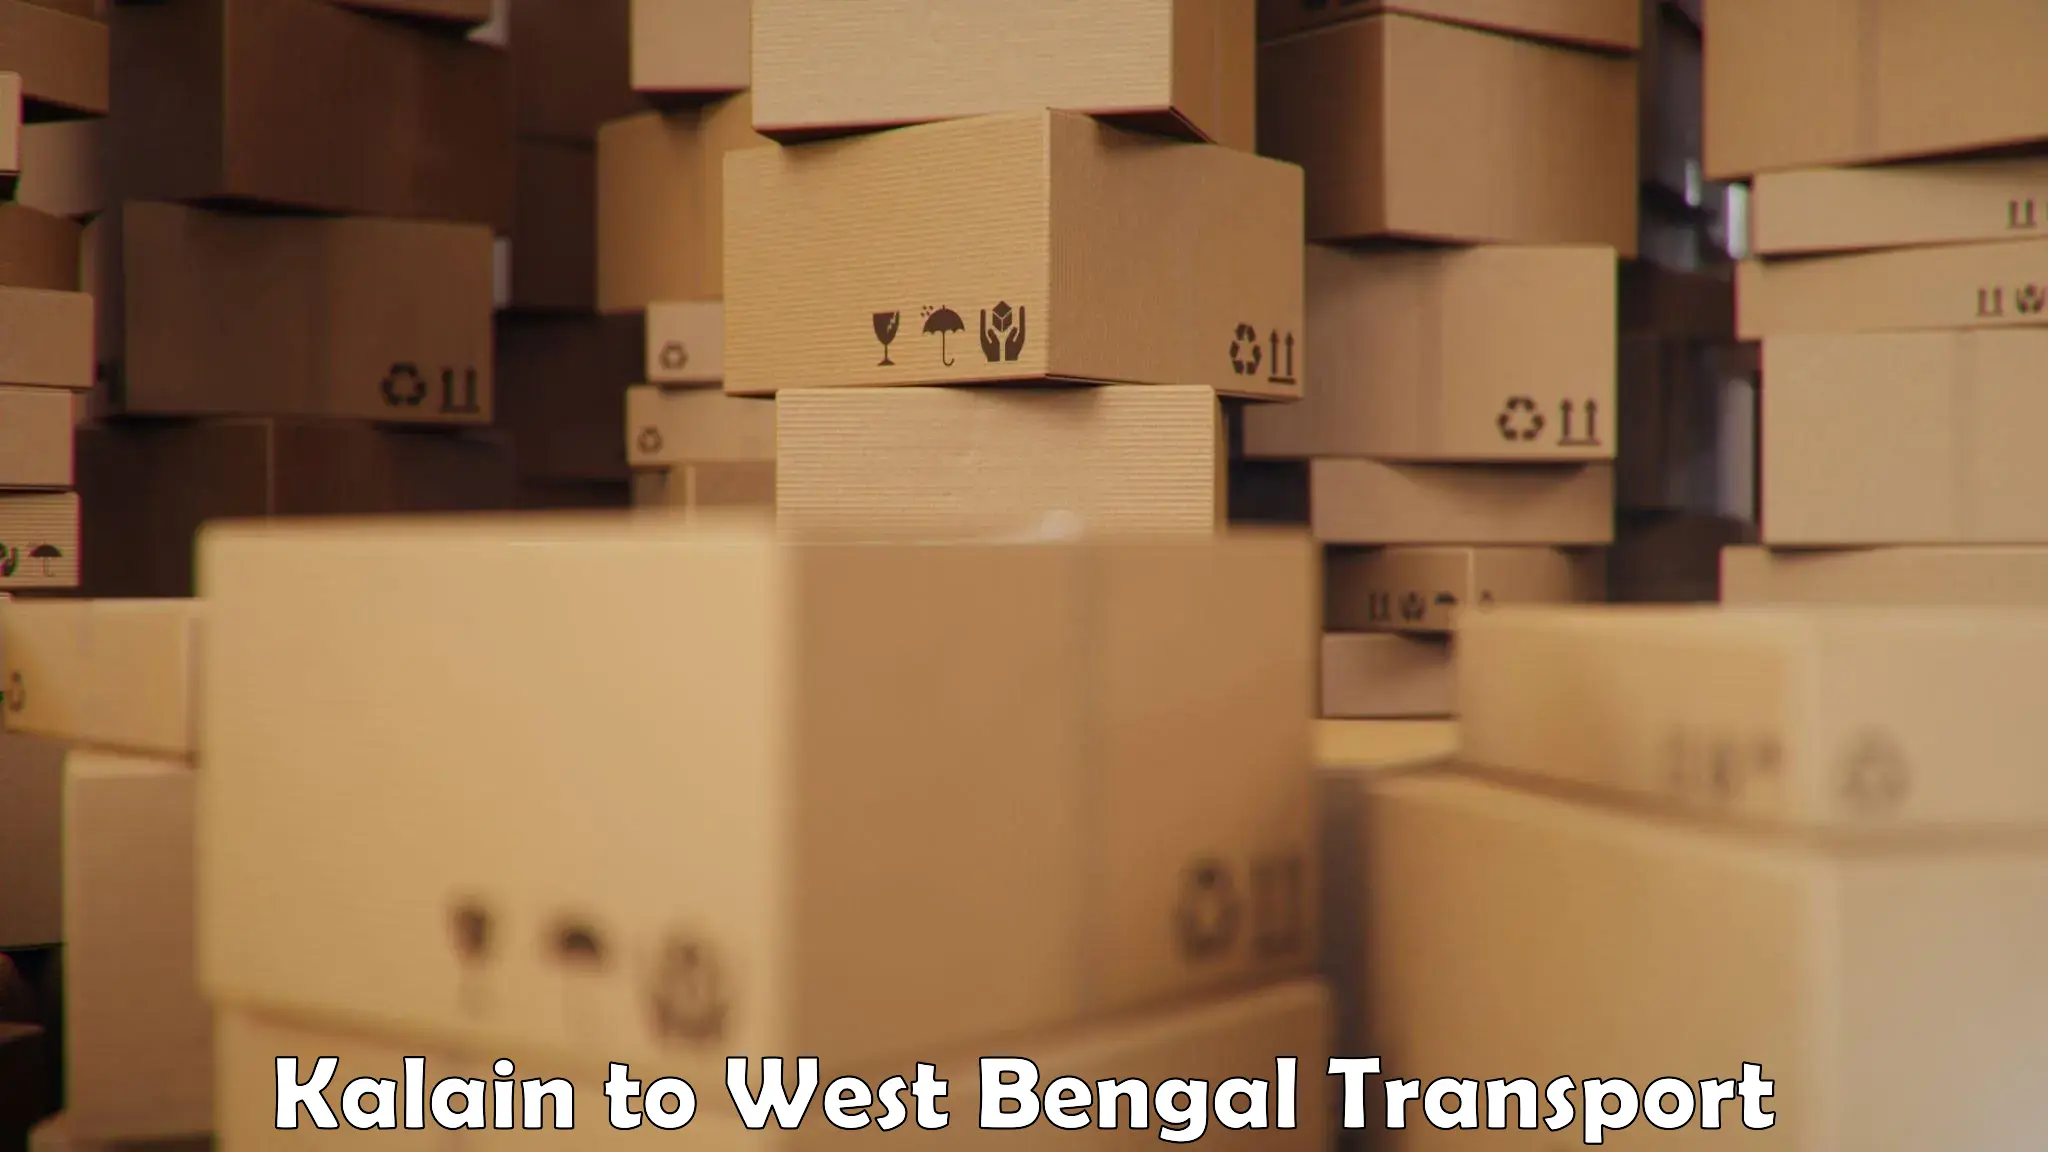 Container transport service Kalain to West Bengal